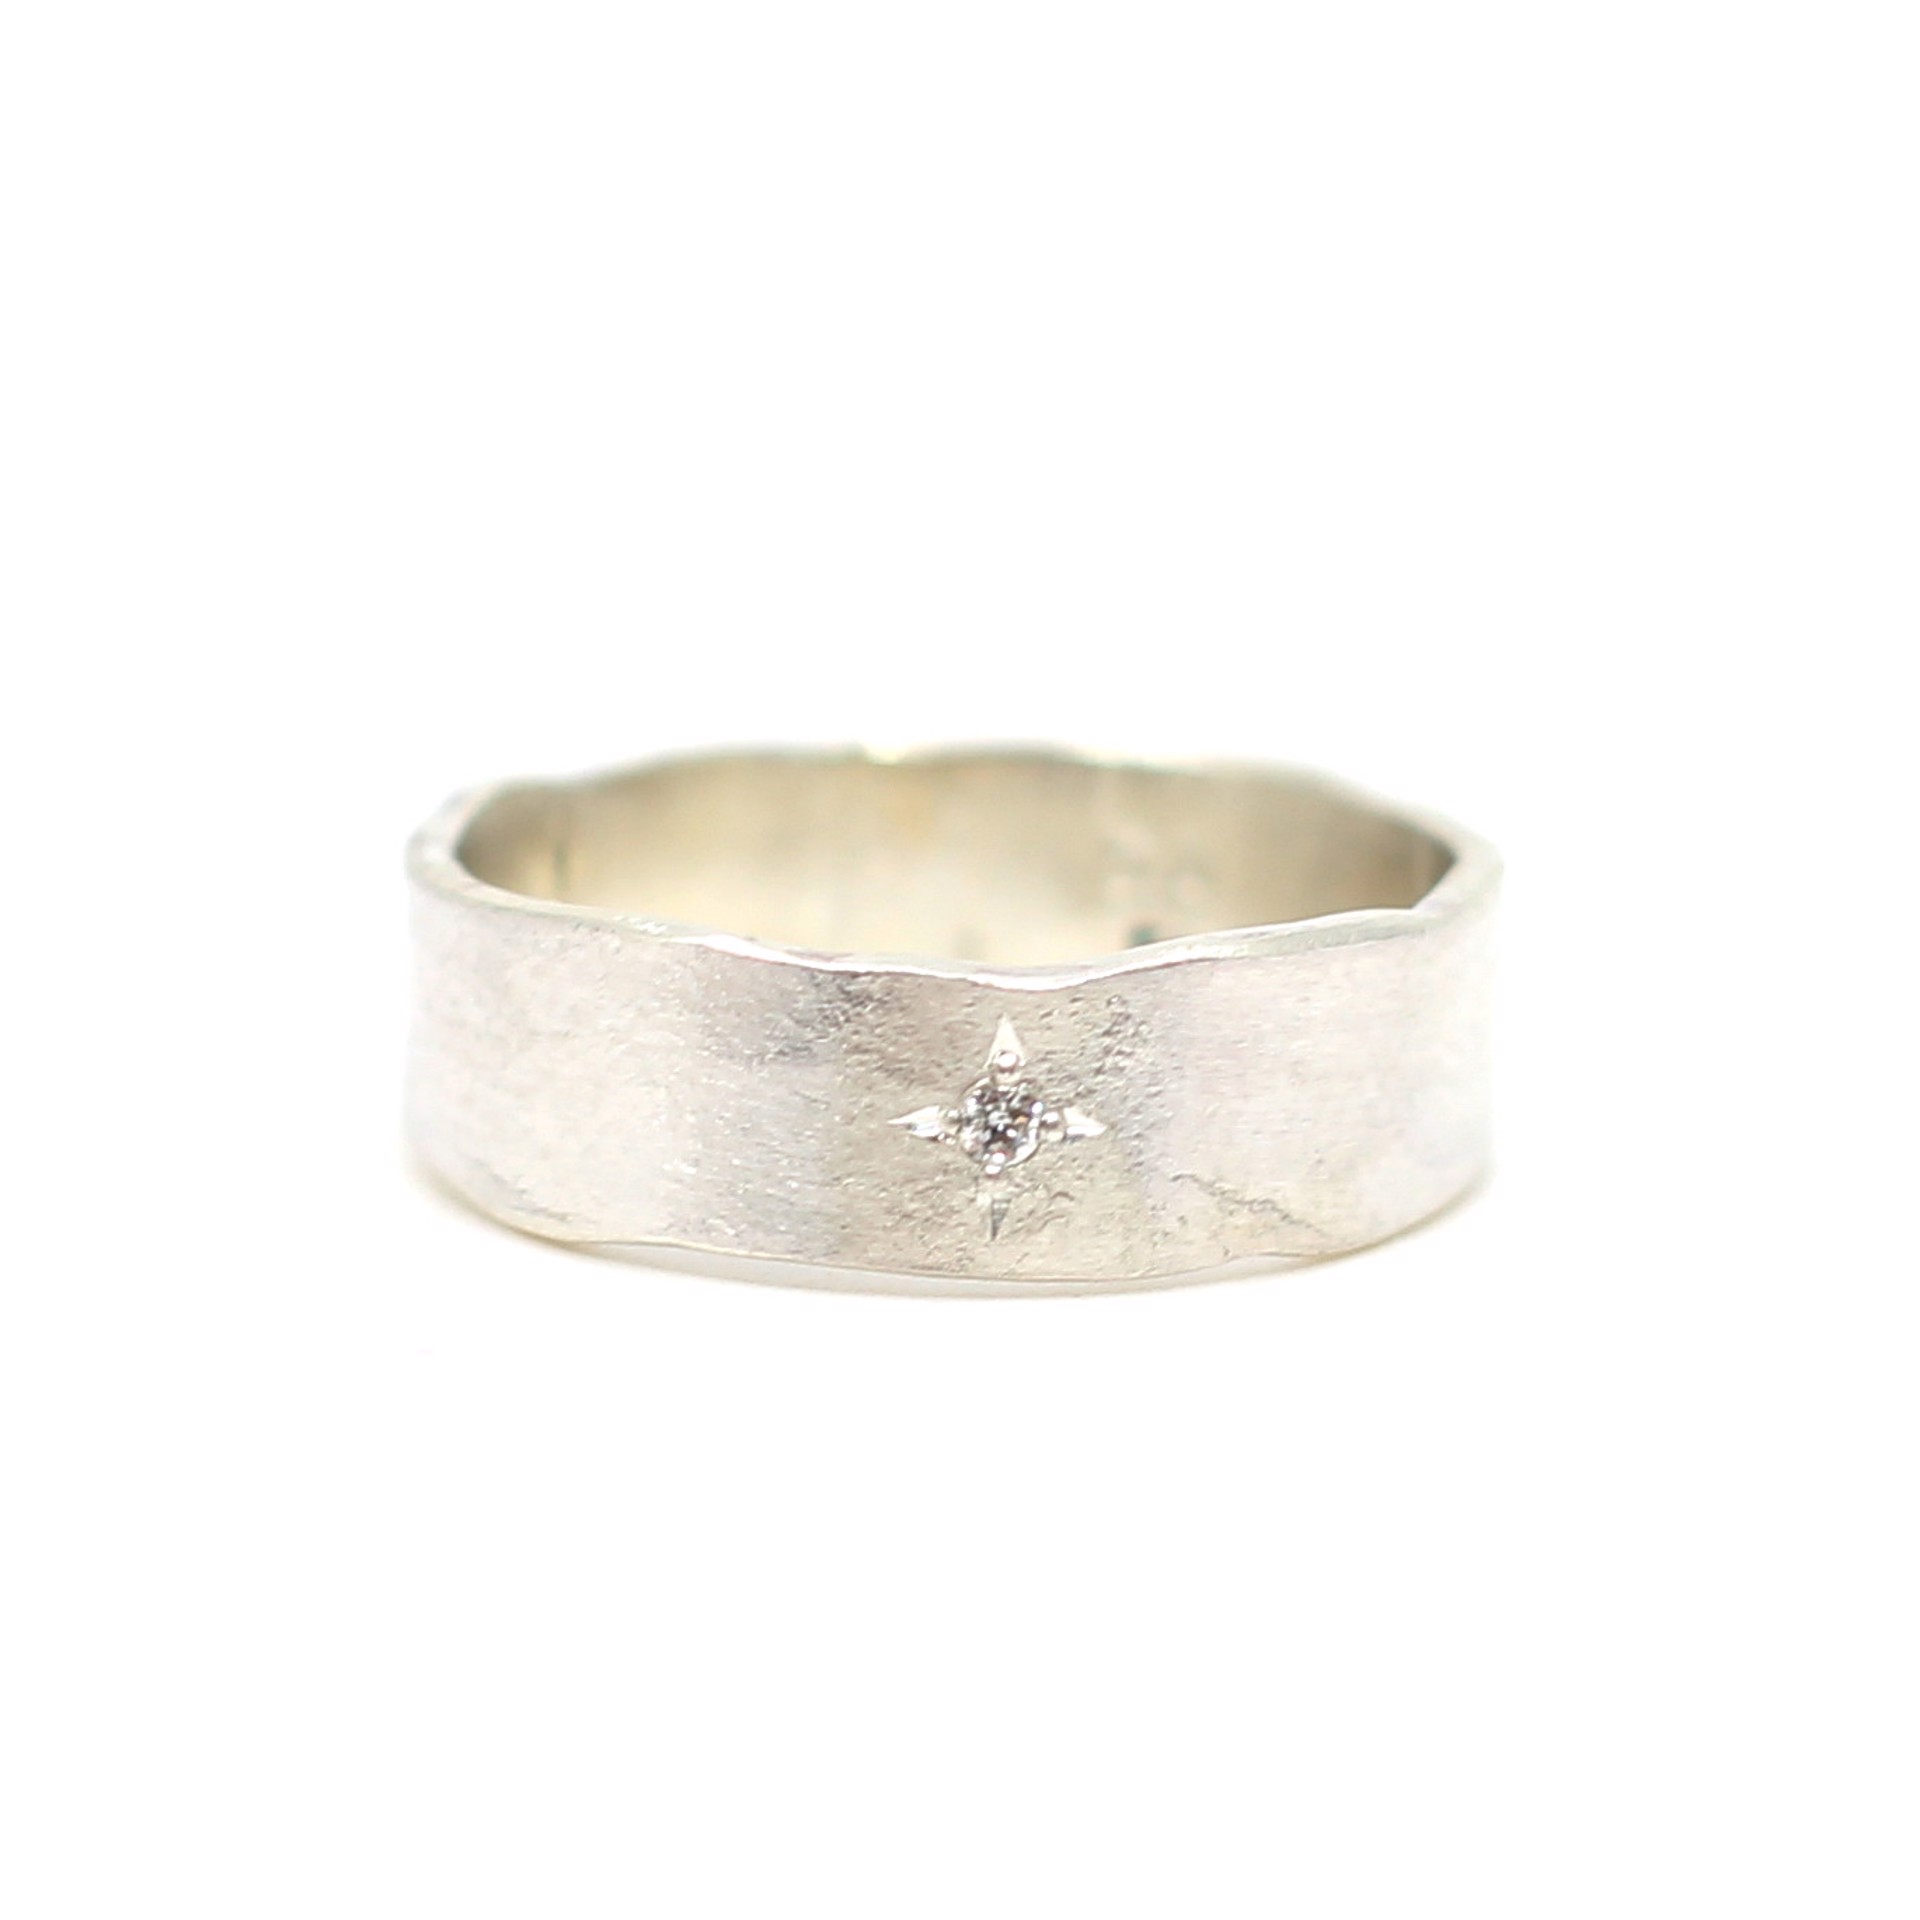 Single Star Ring (Size 7.5) Special Order by Leia Zumbro